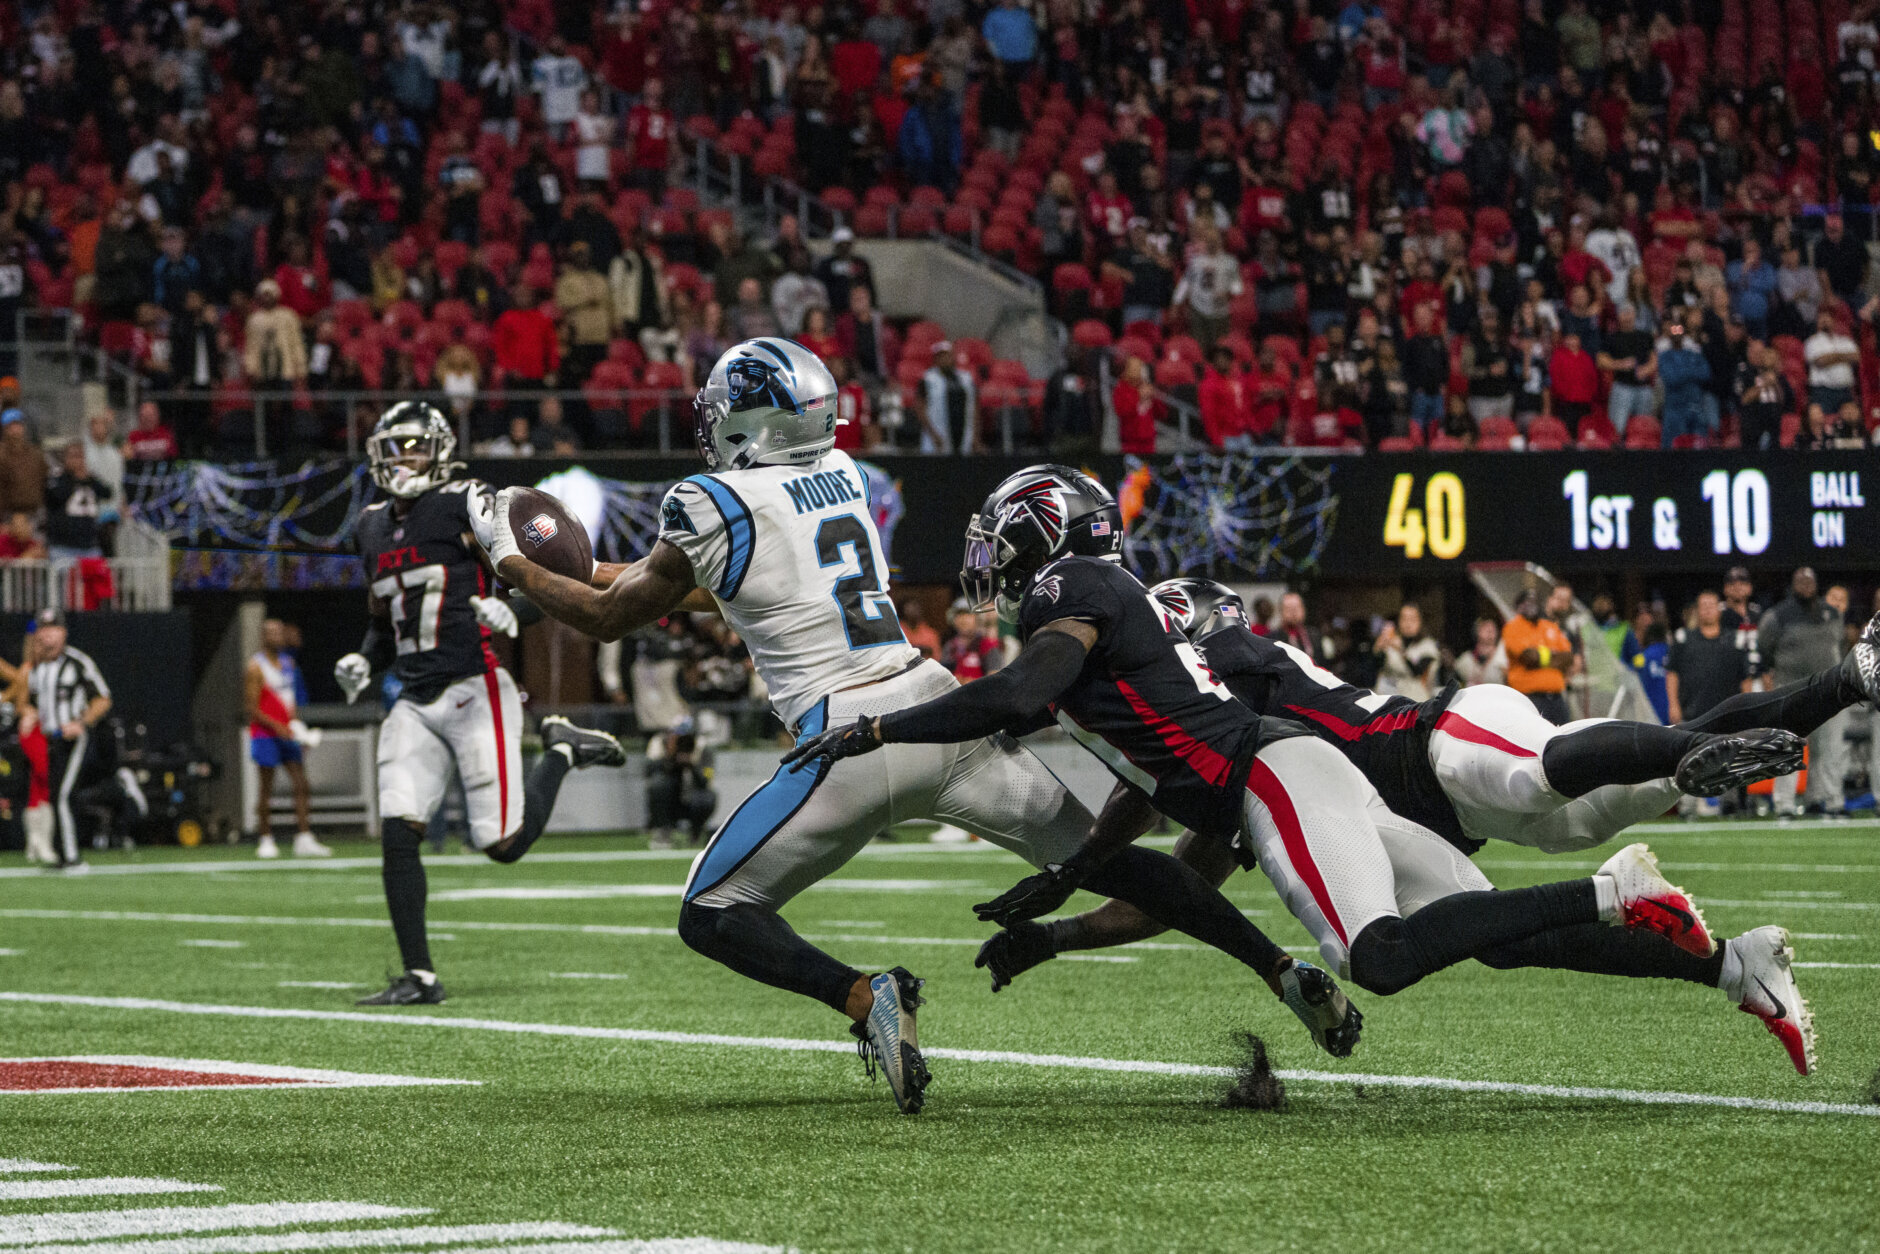 <p><em><strong>Panthers 34</strong></em><br />
<em><strong>Falcons 37 (OT)</strong></em></p>
<p>Atlanta has three straight home wins for the first time since 2017-18 and sits atop the worst division in football. Considering how <a href="https://twitter.com/ESPNStatsInfo/status/1586831812126736384?s=20&amp;t=1hV9LH-TkICsHjm2aPxK5g" target="_blank" rel="noopener">Carolina kicked this one away</a>, neither will last for much longer.</p>
